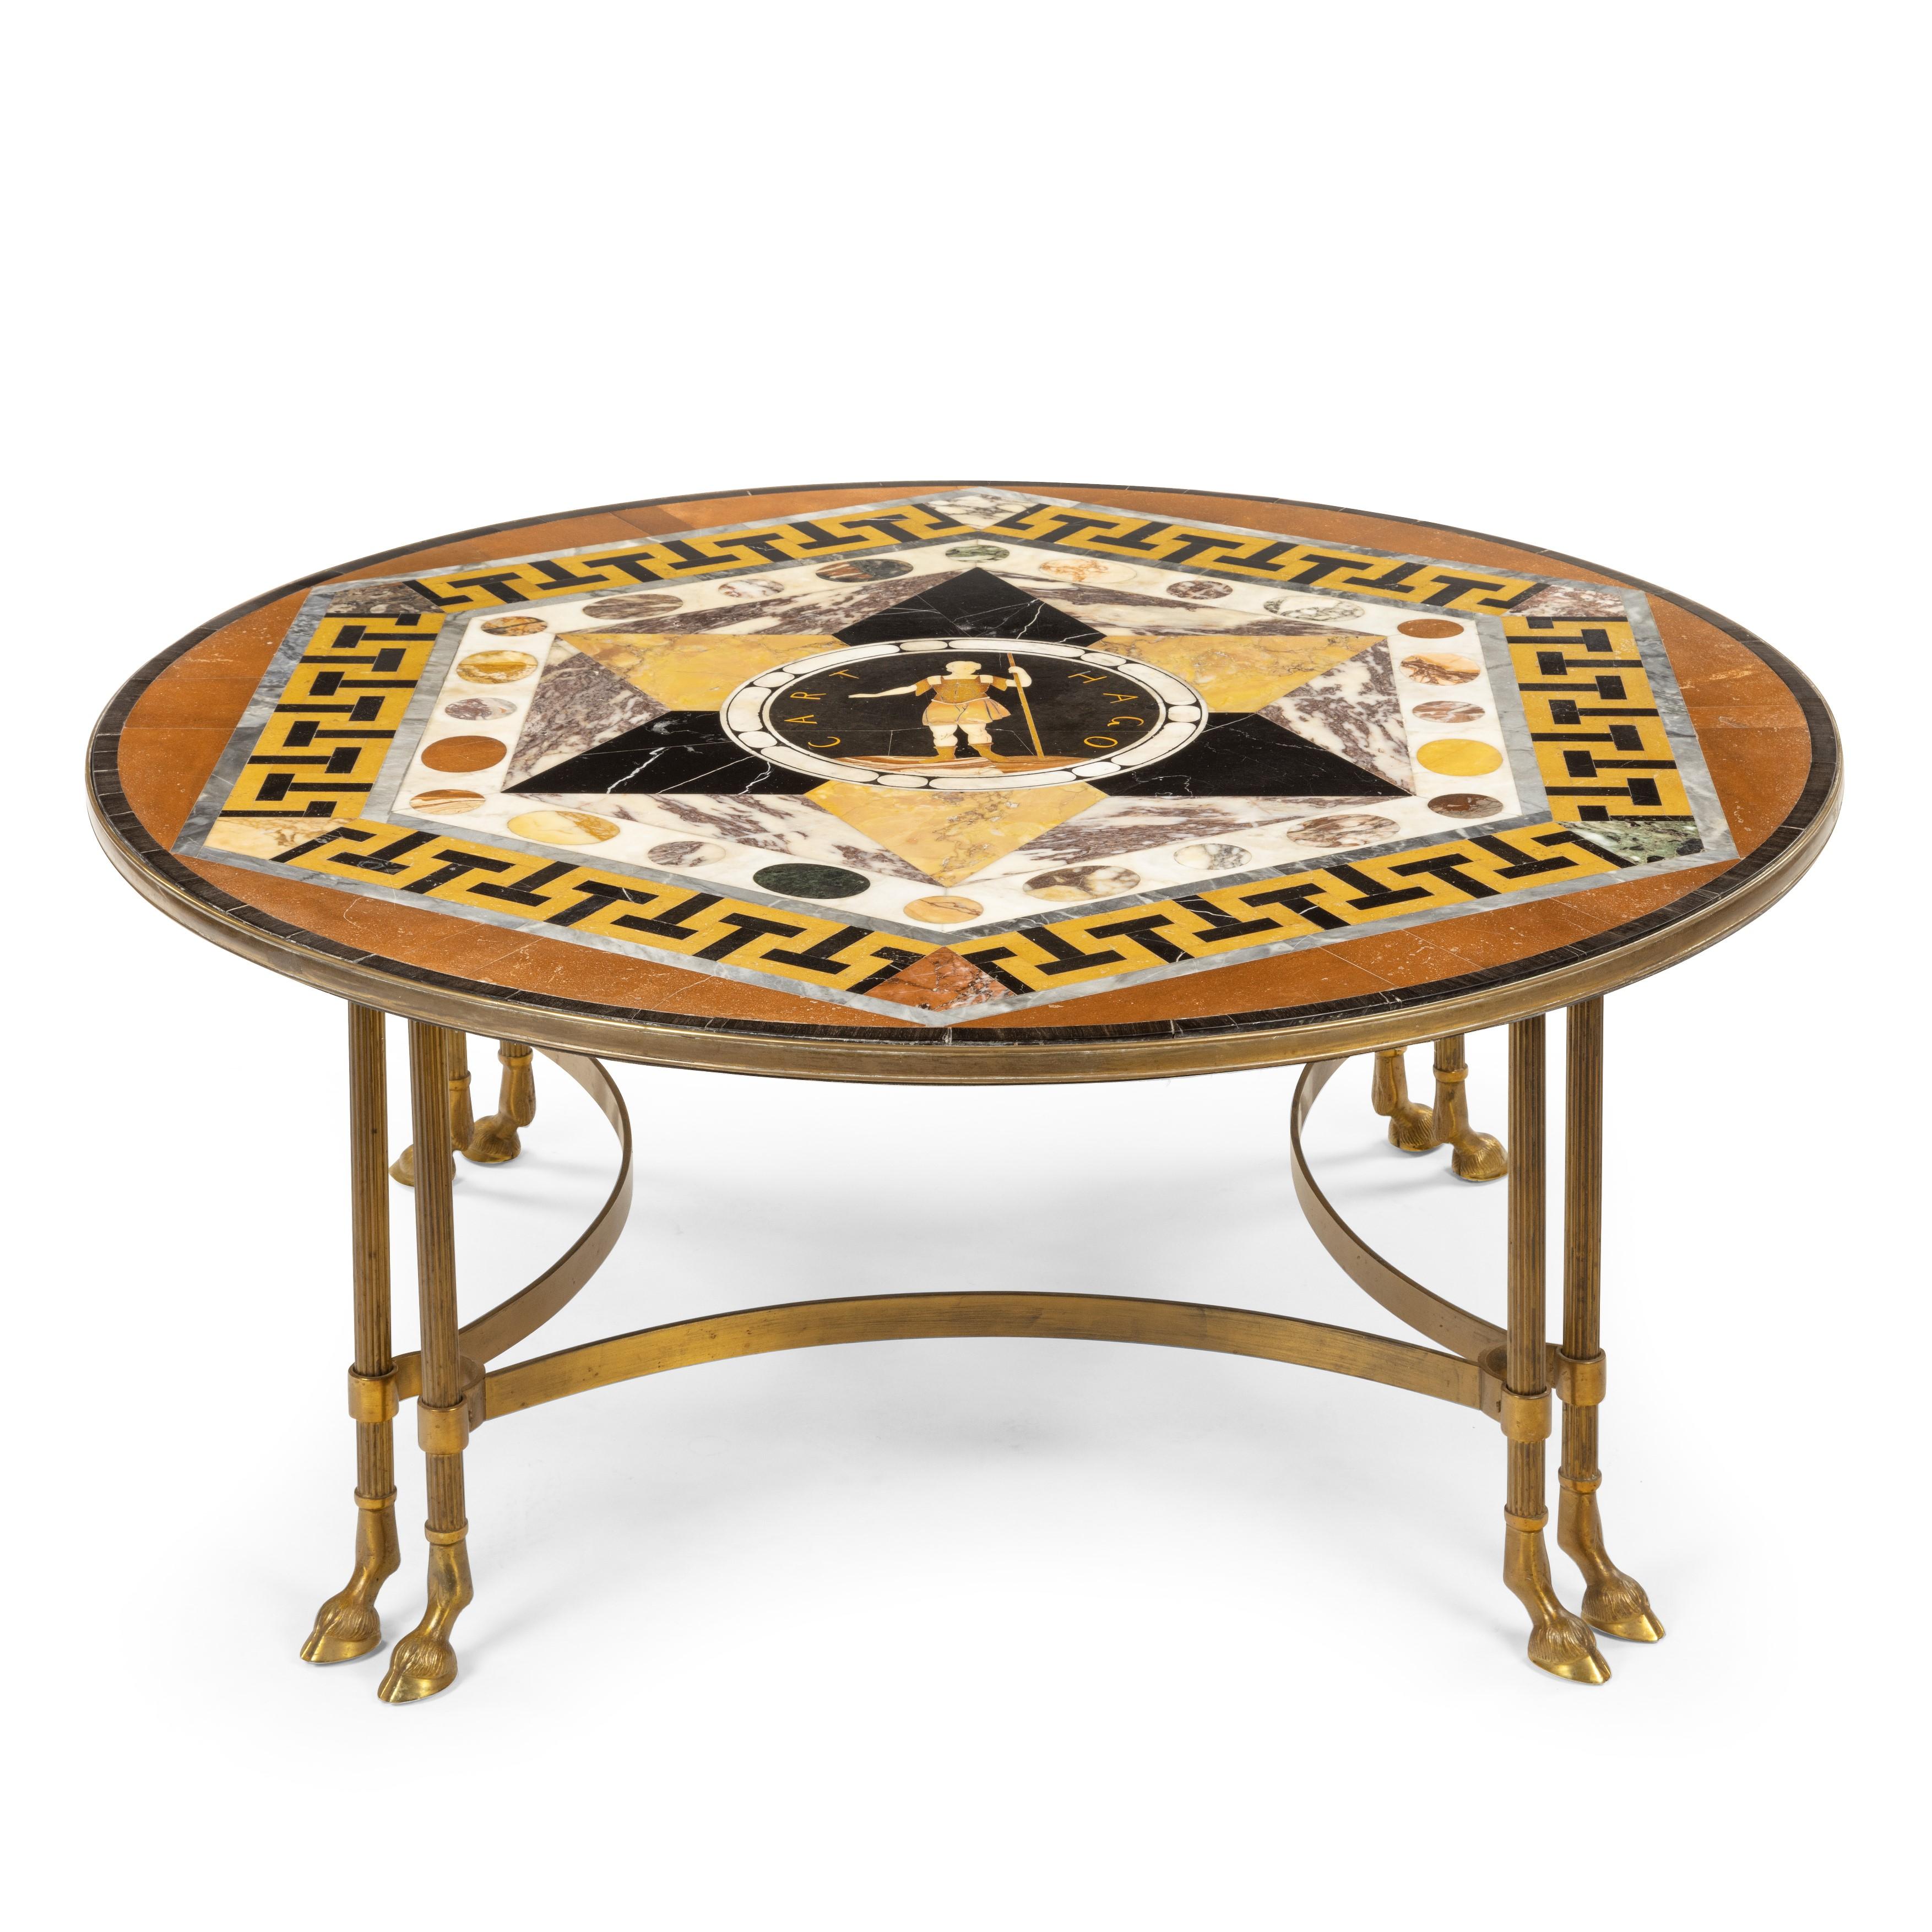 A fine maltese specimen marble tabletop attributed to Joseph Darmanin of Malta of larger than usual size.

Now set of a brass base and set as a coffee table.

This fine top depicts a classical warrior and the word carthago (carthage) the